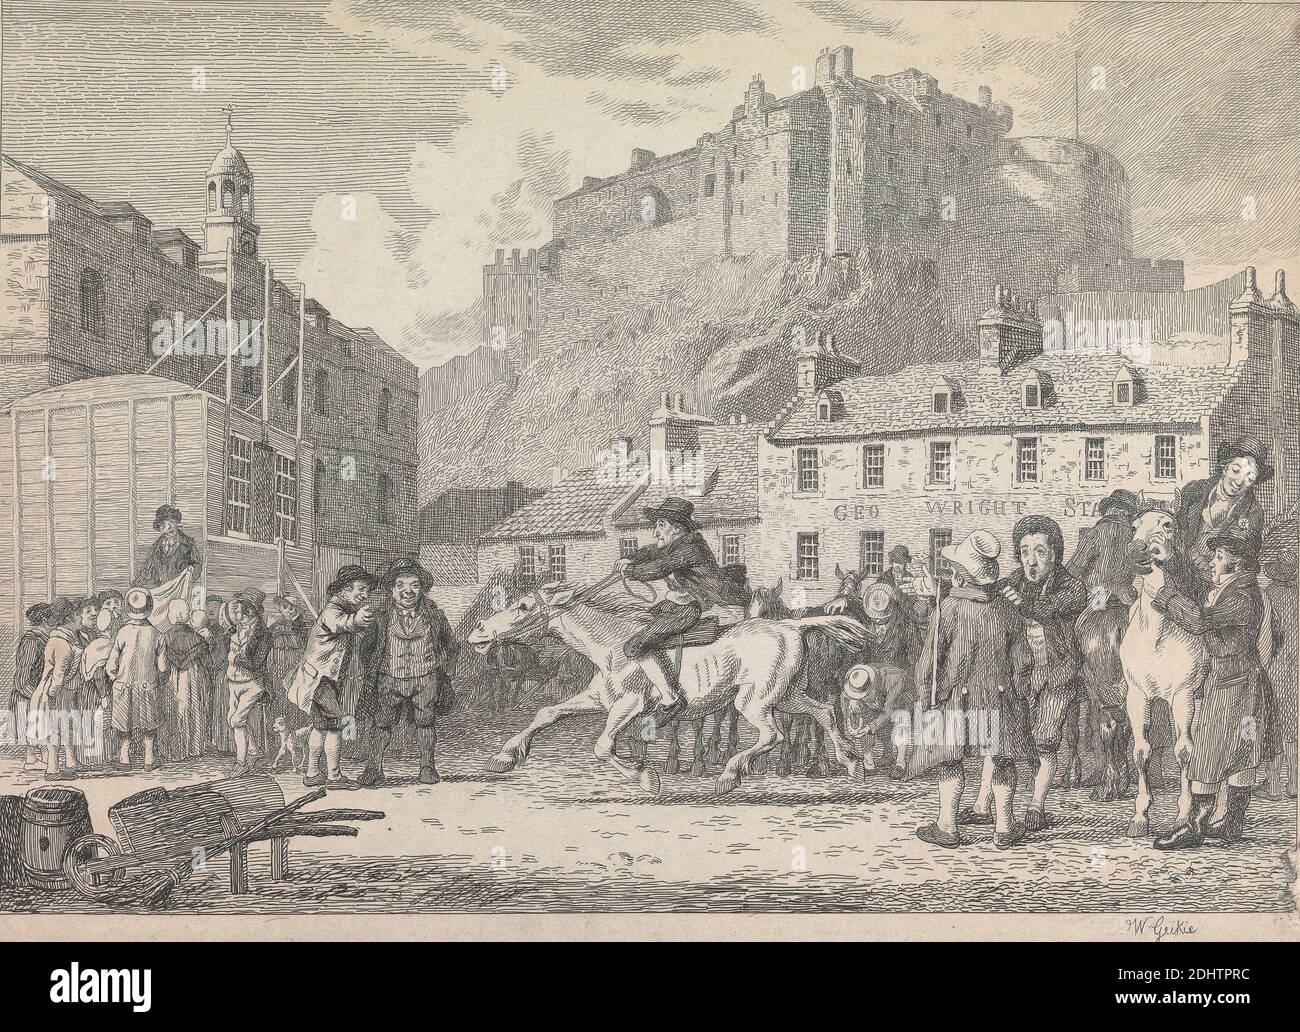 Edinburgh Castle and Horse Fair, Walter Geikie, 1795–1837, British, undated, Etching on moderately thick, slightly textured, beige wove paper, Sheet: 6 x 8 1/4 inches (15.2 x 21 cm) and Image: 5 11/16 x 8 1/16 inches (14.4 x 20.5 cm), architectural subject, barrels (containers), buildings, buying, castle, examining, genre subject, hats, horses (animals), markets, men, merchants, purchasing, rearing (horse), riding, selling, square, wheelbarrow, Edinburgh, Edinburgh castle, Europe, Scotland, United Kingdom Stock Photo